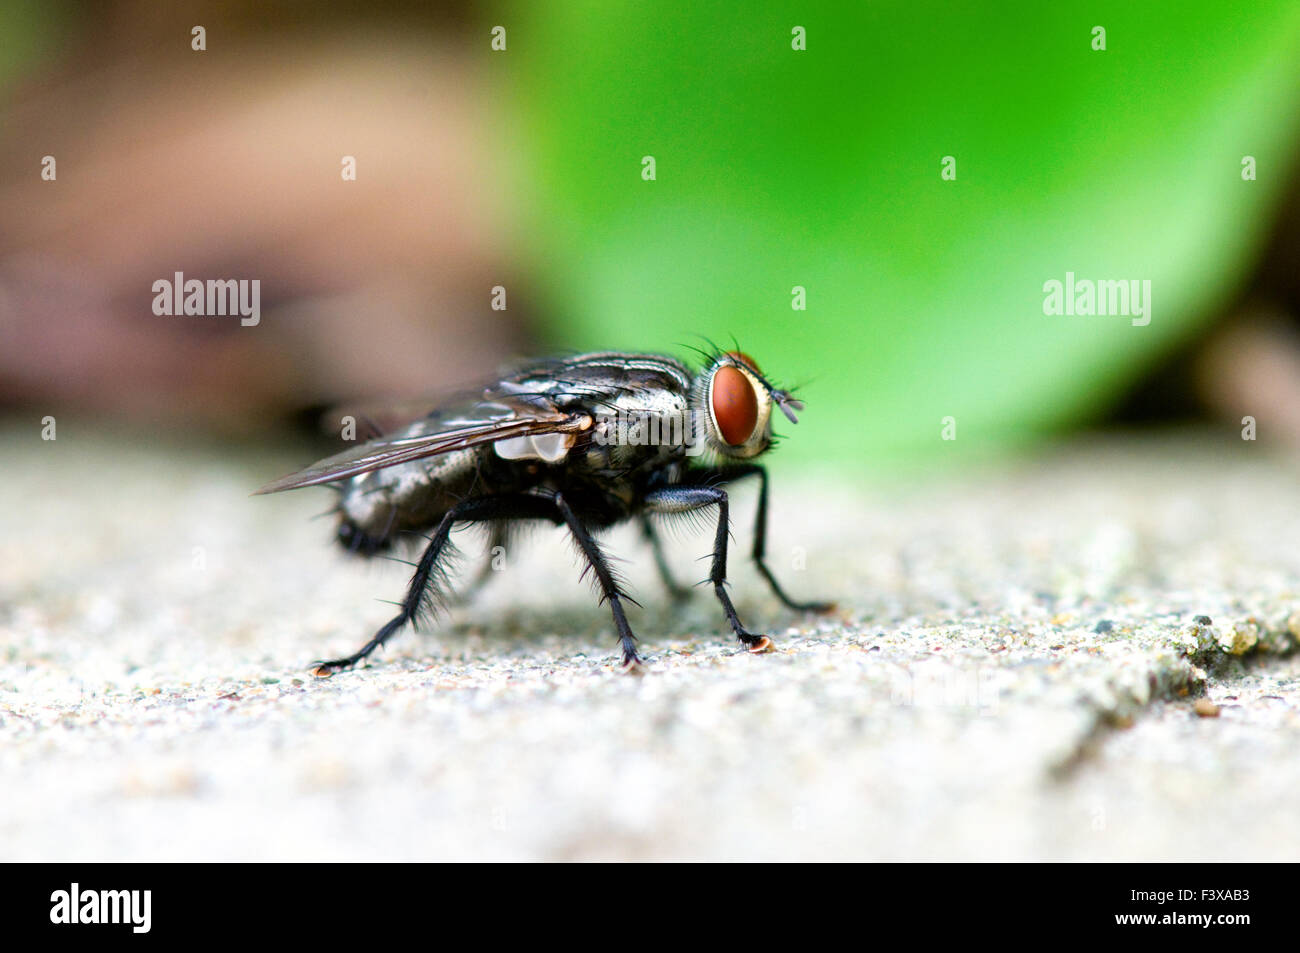 A close shot of red eye fly in green leaf Stock Photo